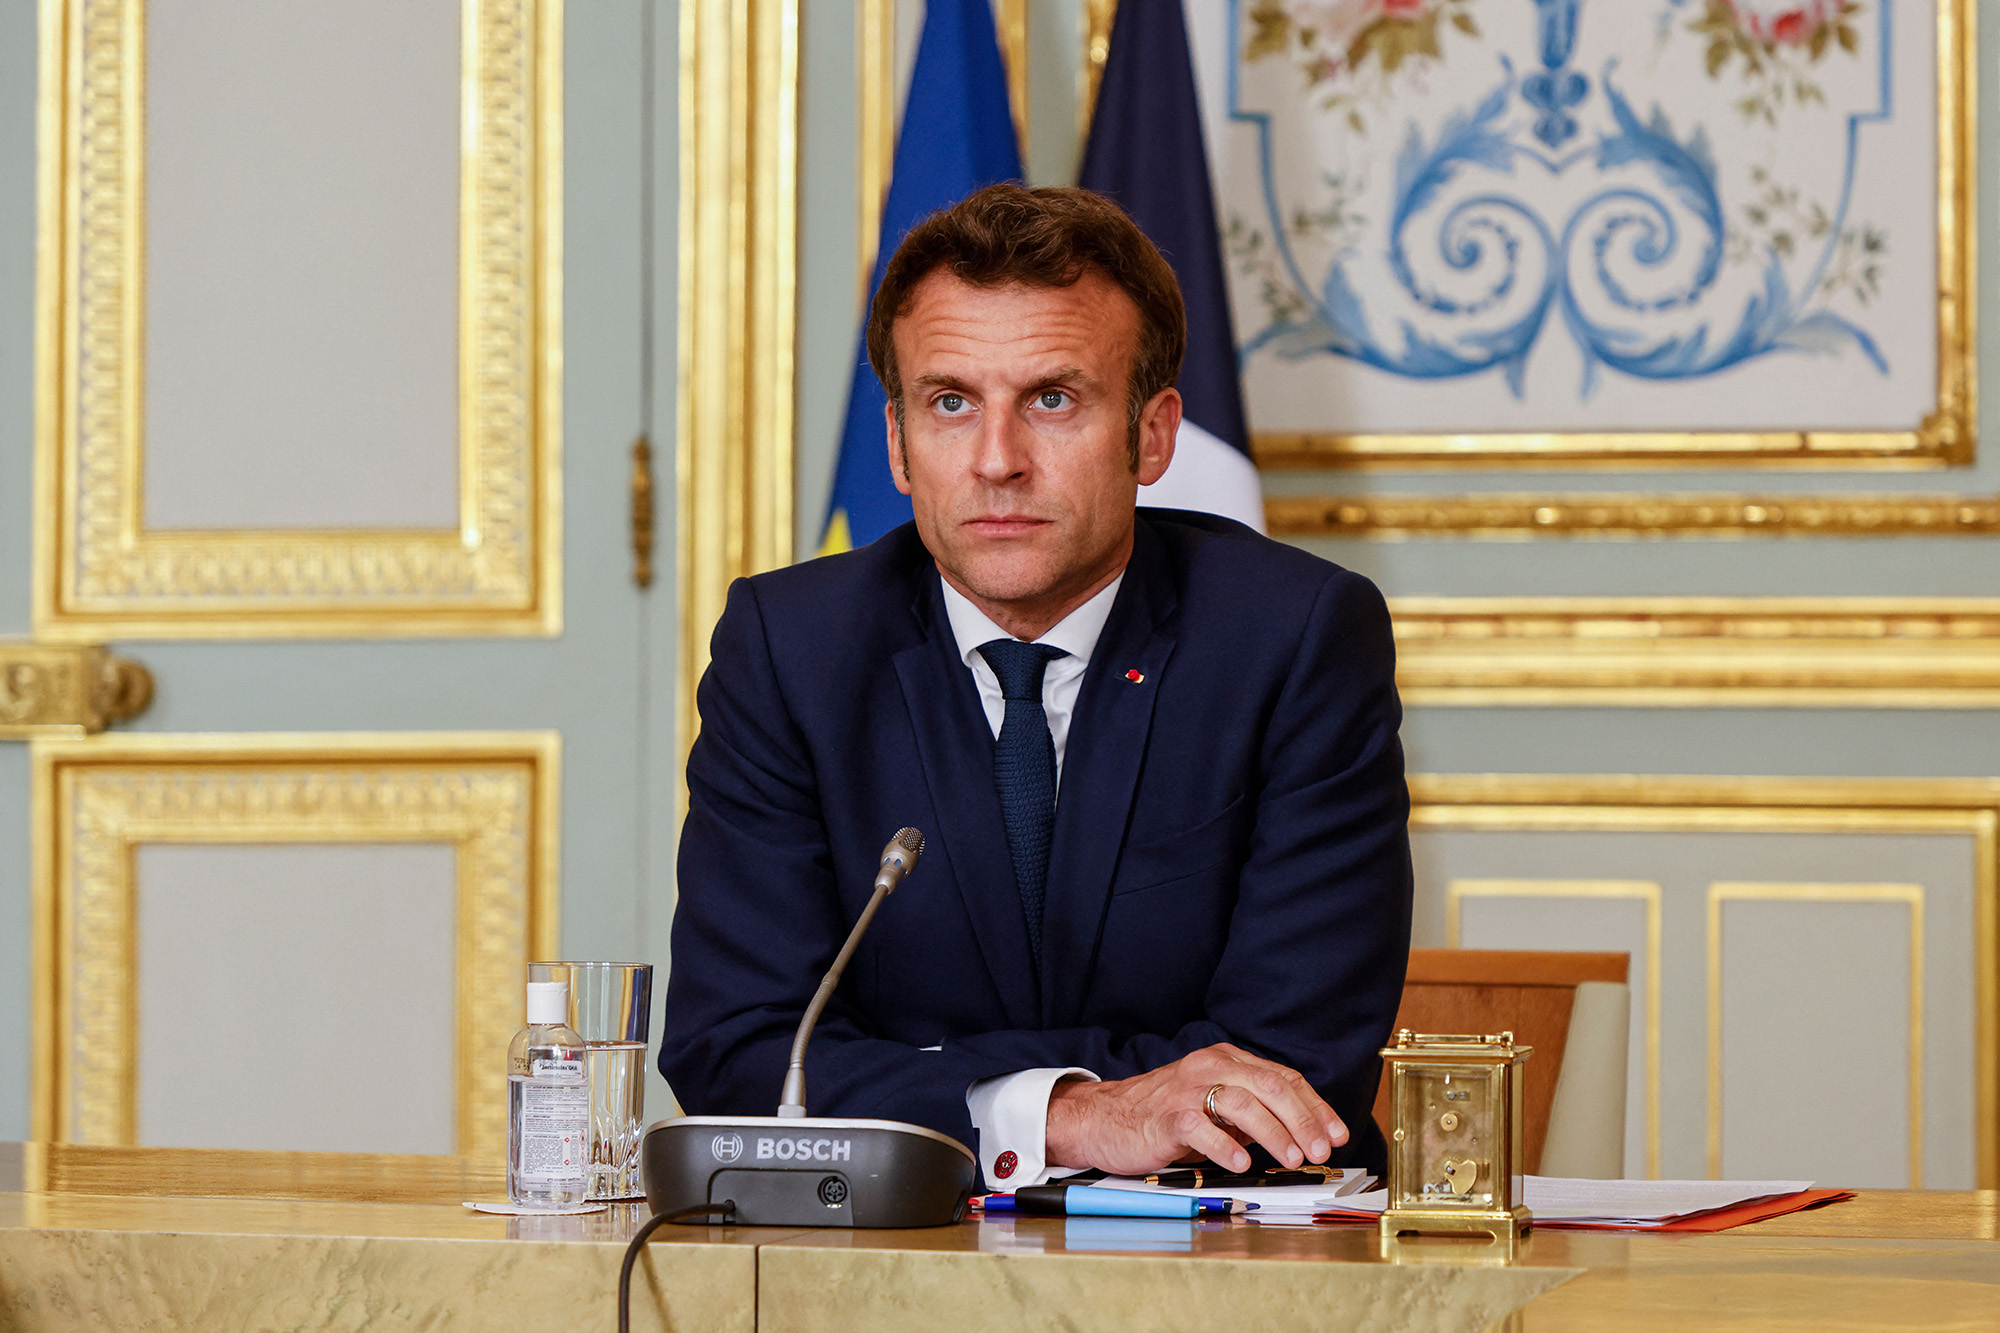 France's President Emmanuel Macron takes part in an expanded videoconference with the Quint group at the presidential Elysee Palace in Paris, France, on April 19.